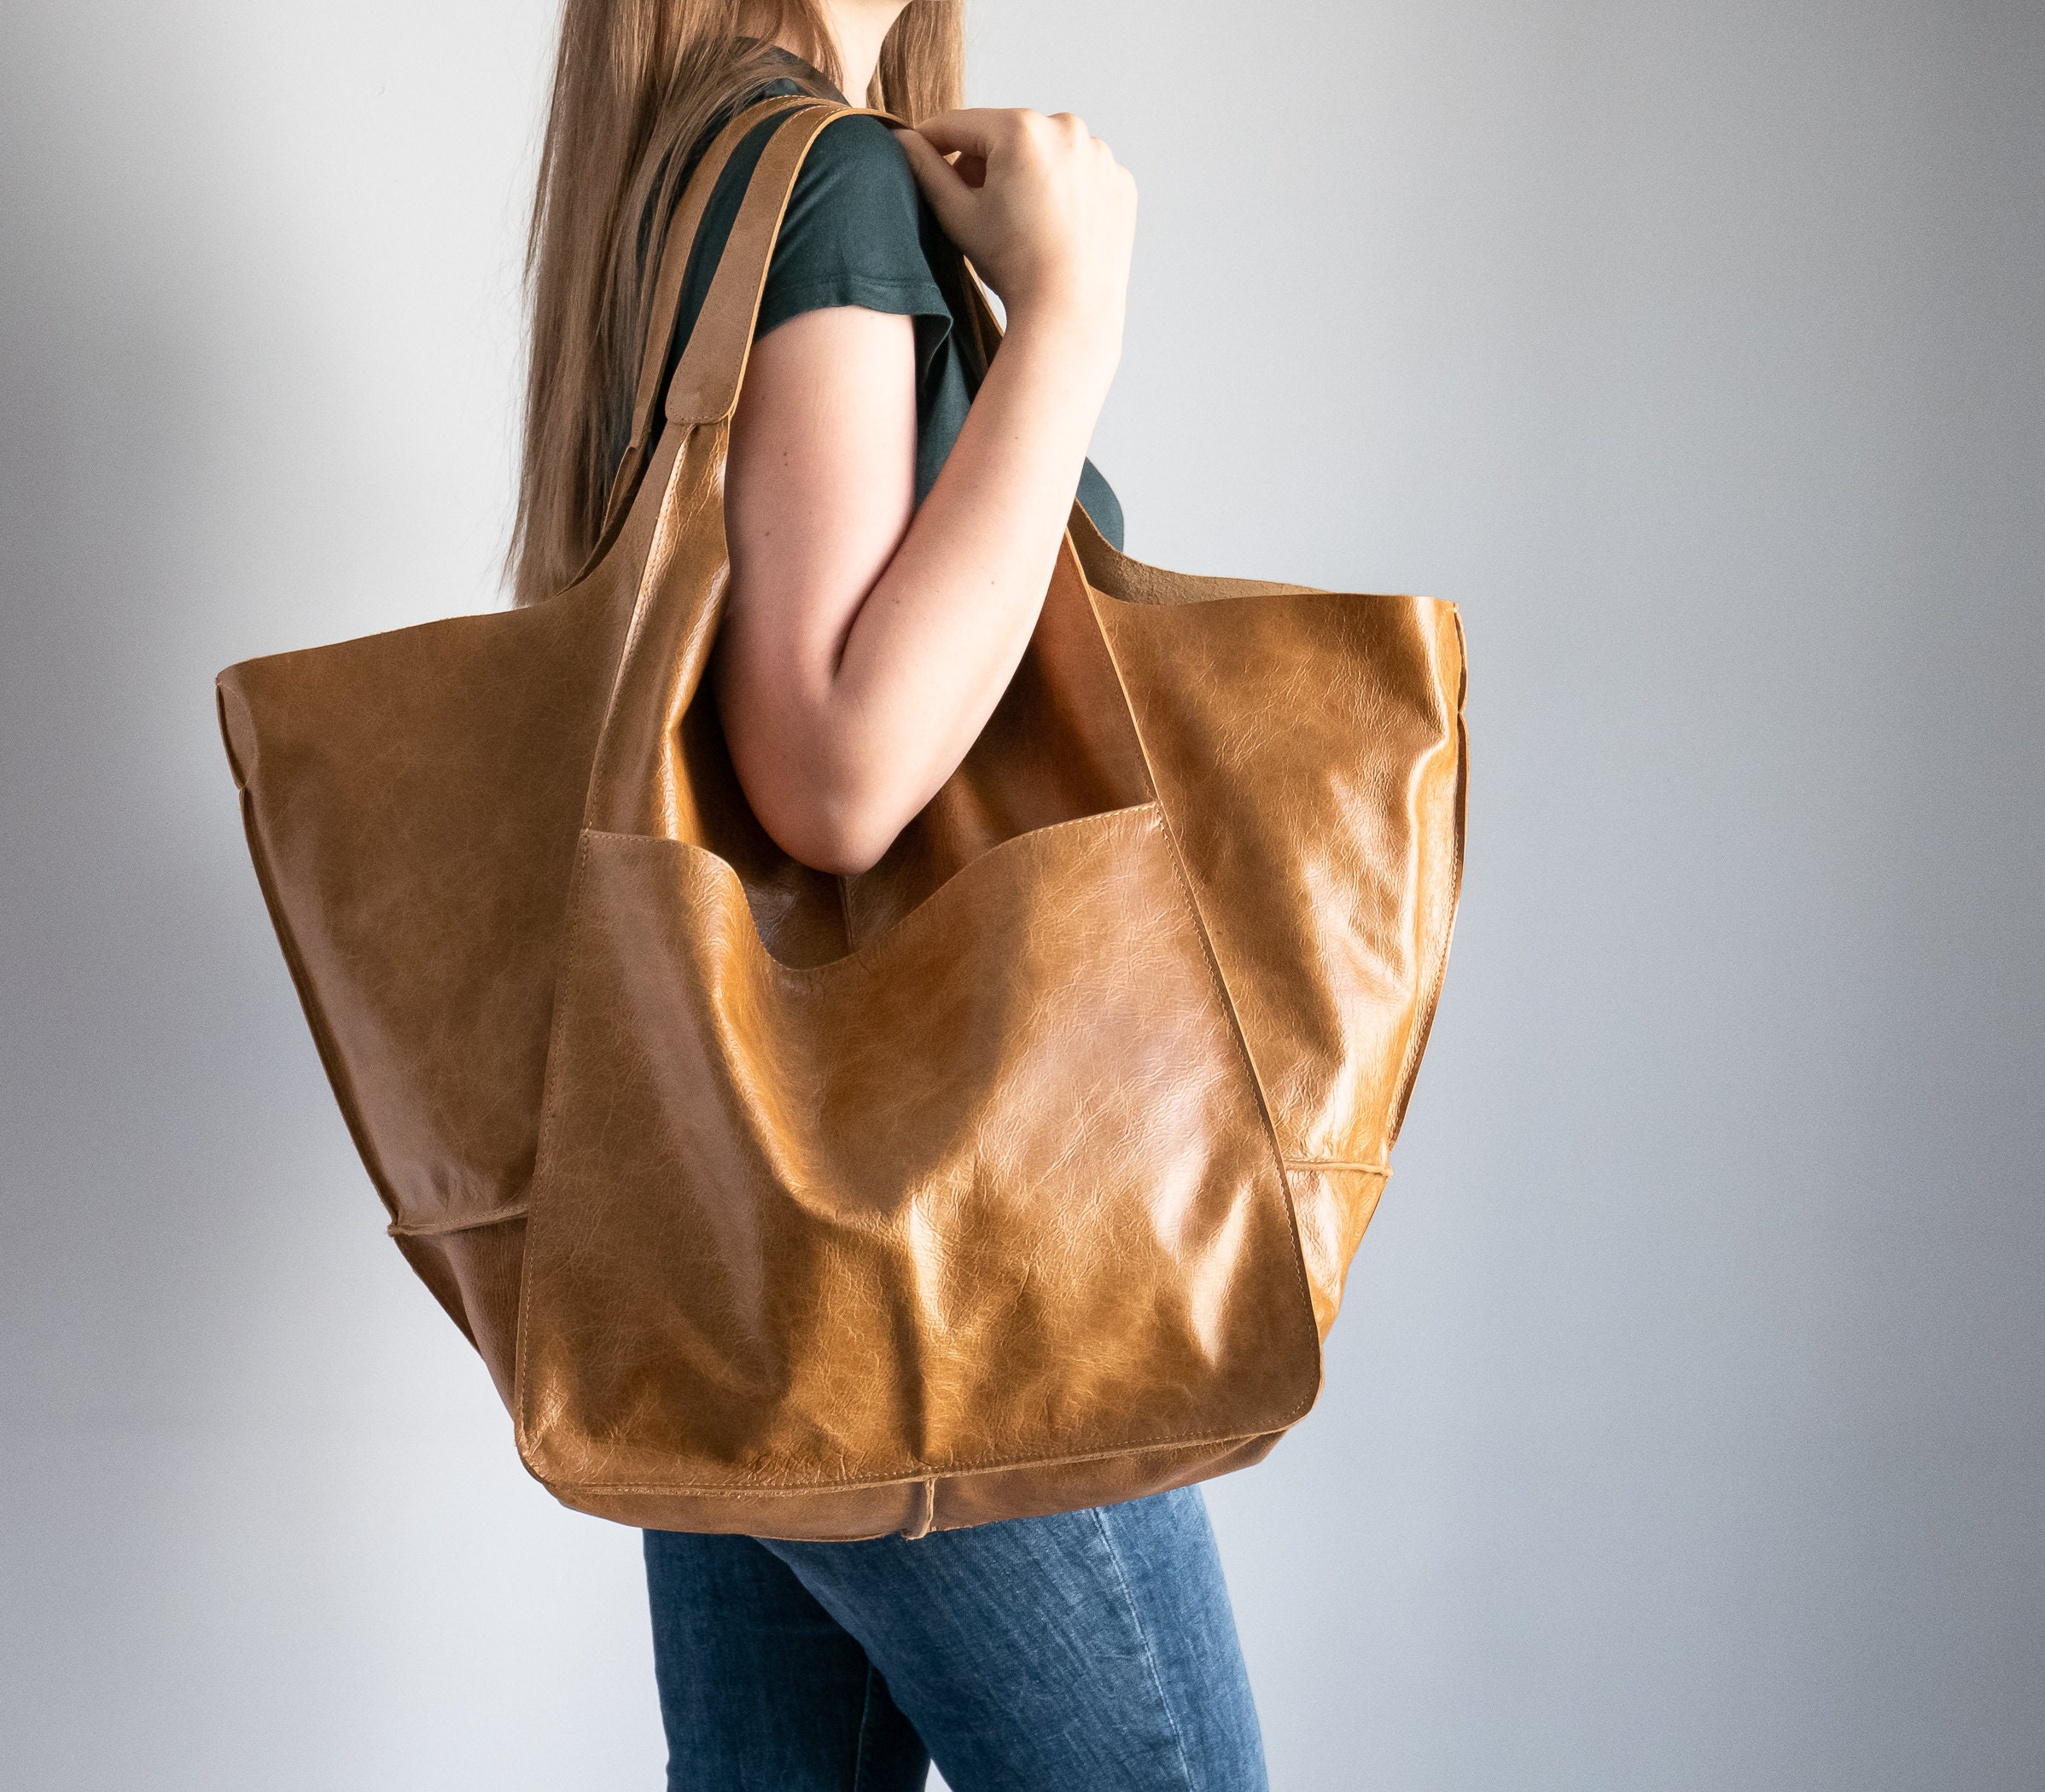 Lakeland Leather Torver Leather Tote Bag in Tan One Size